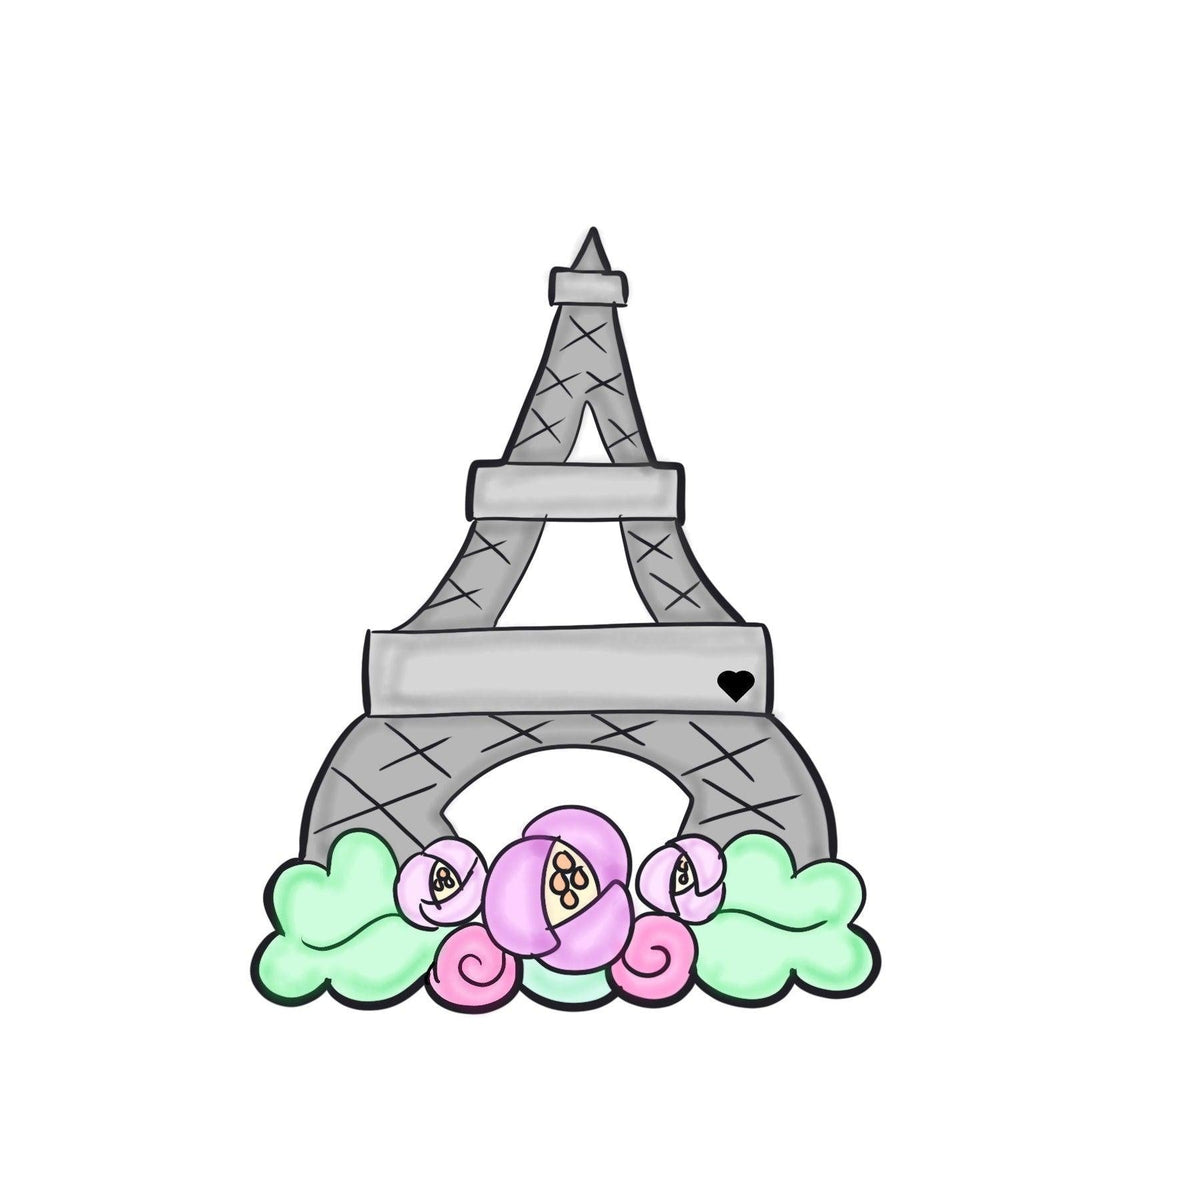 Floral Eiffel Tower Cookie Cutter - Sweetleigh 